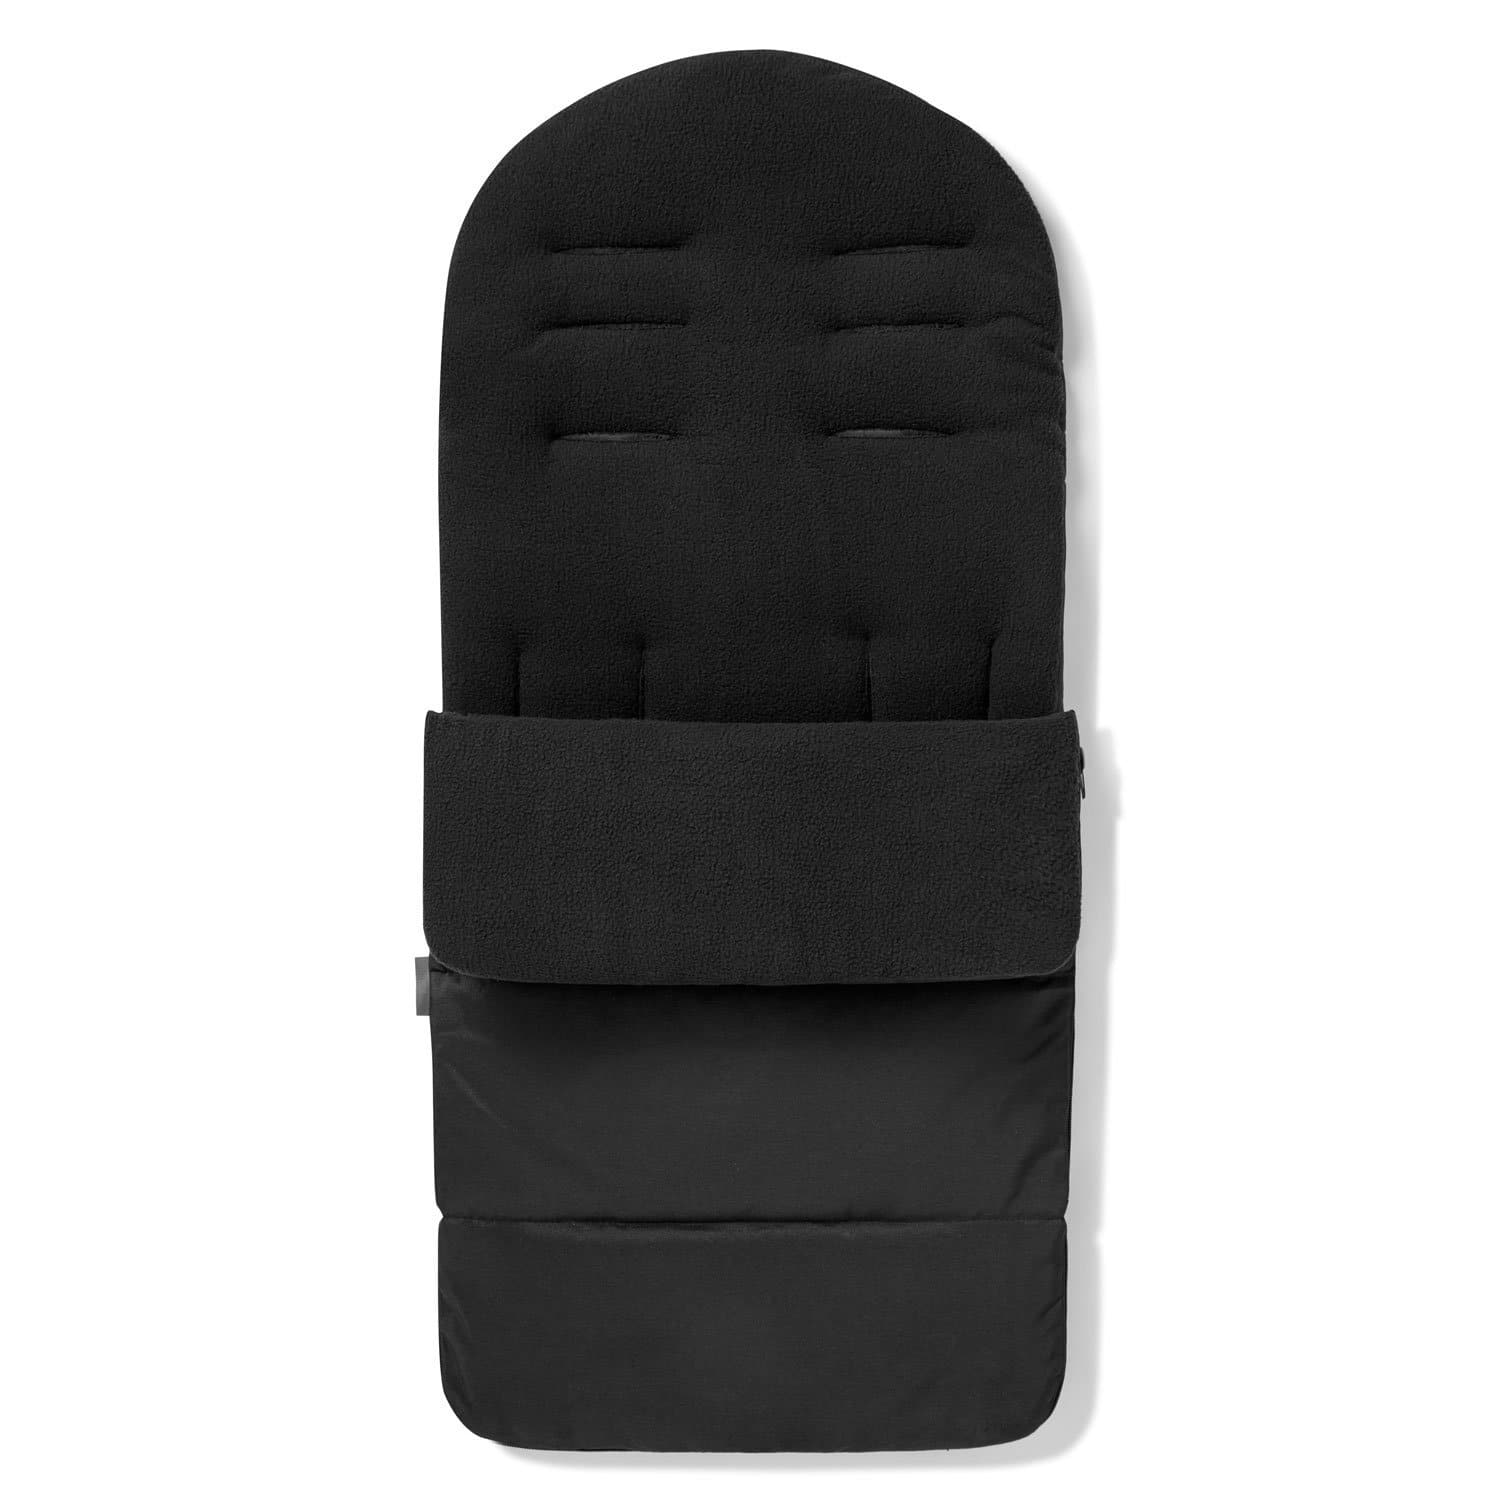 Premium Footmuff / Cosy Toes Compatible with Kiddicouture - Black Jack / Fits All Models | For Your Little One